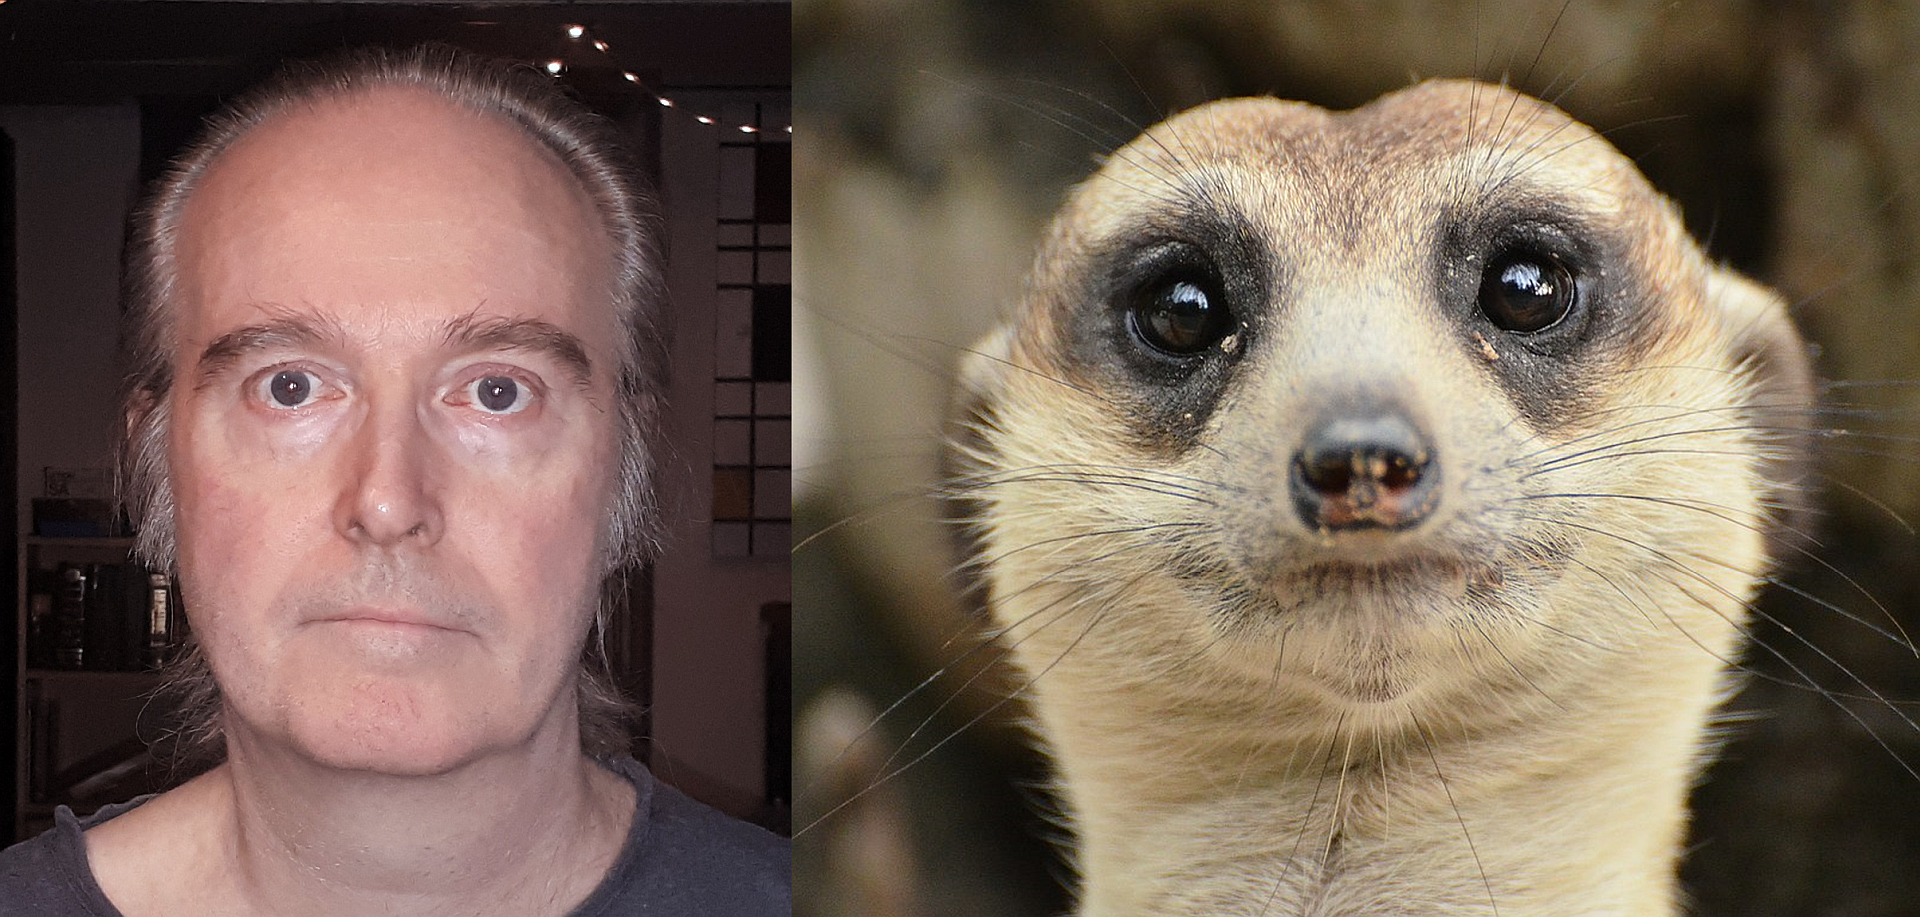 .\misc\Pix_Humans\MeercatCompare_1920.png